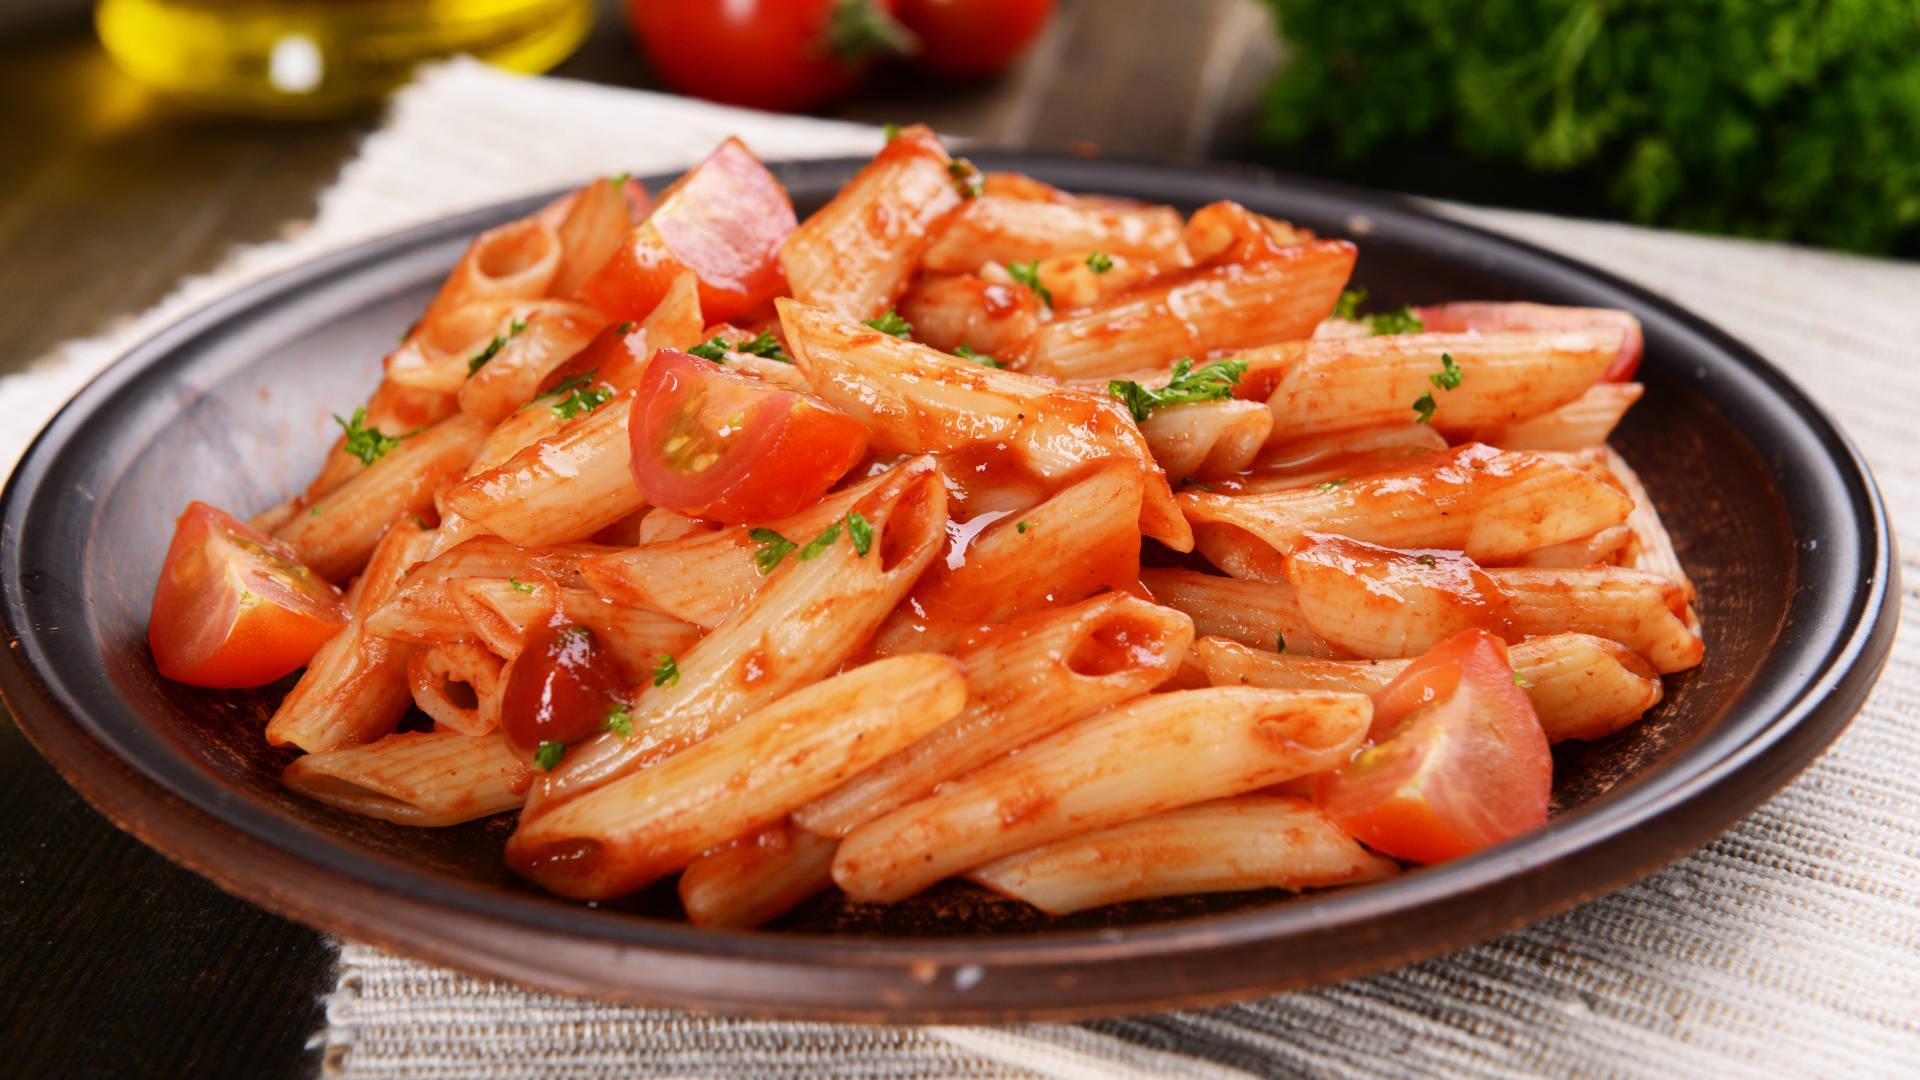 Penne Pasta With Red Sauce